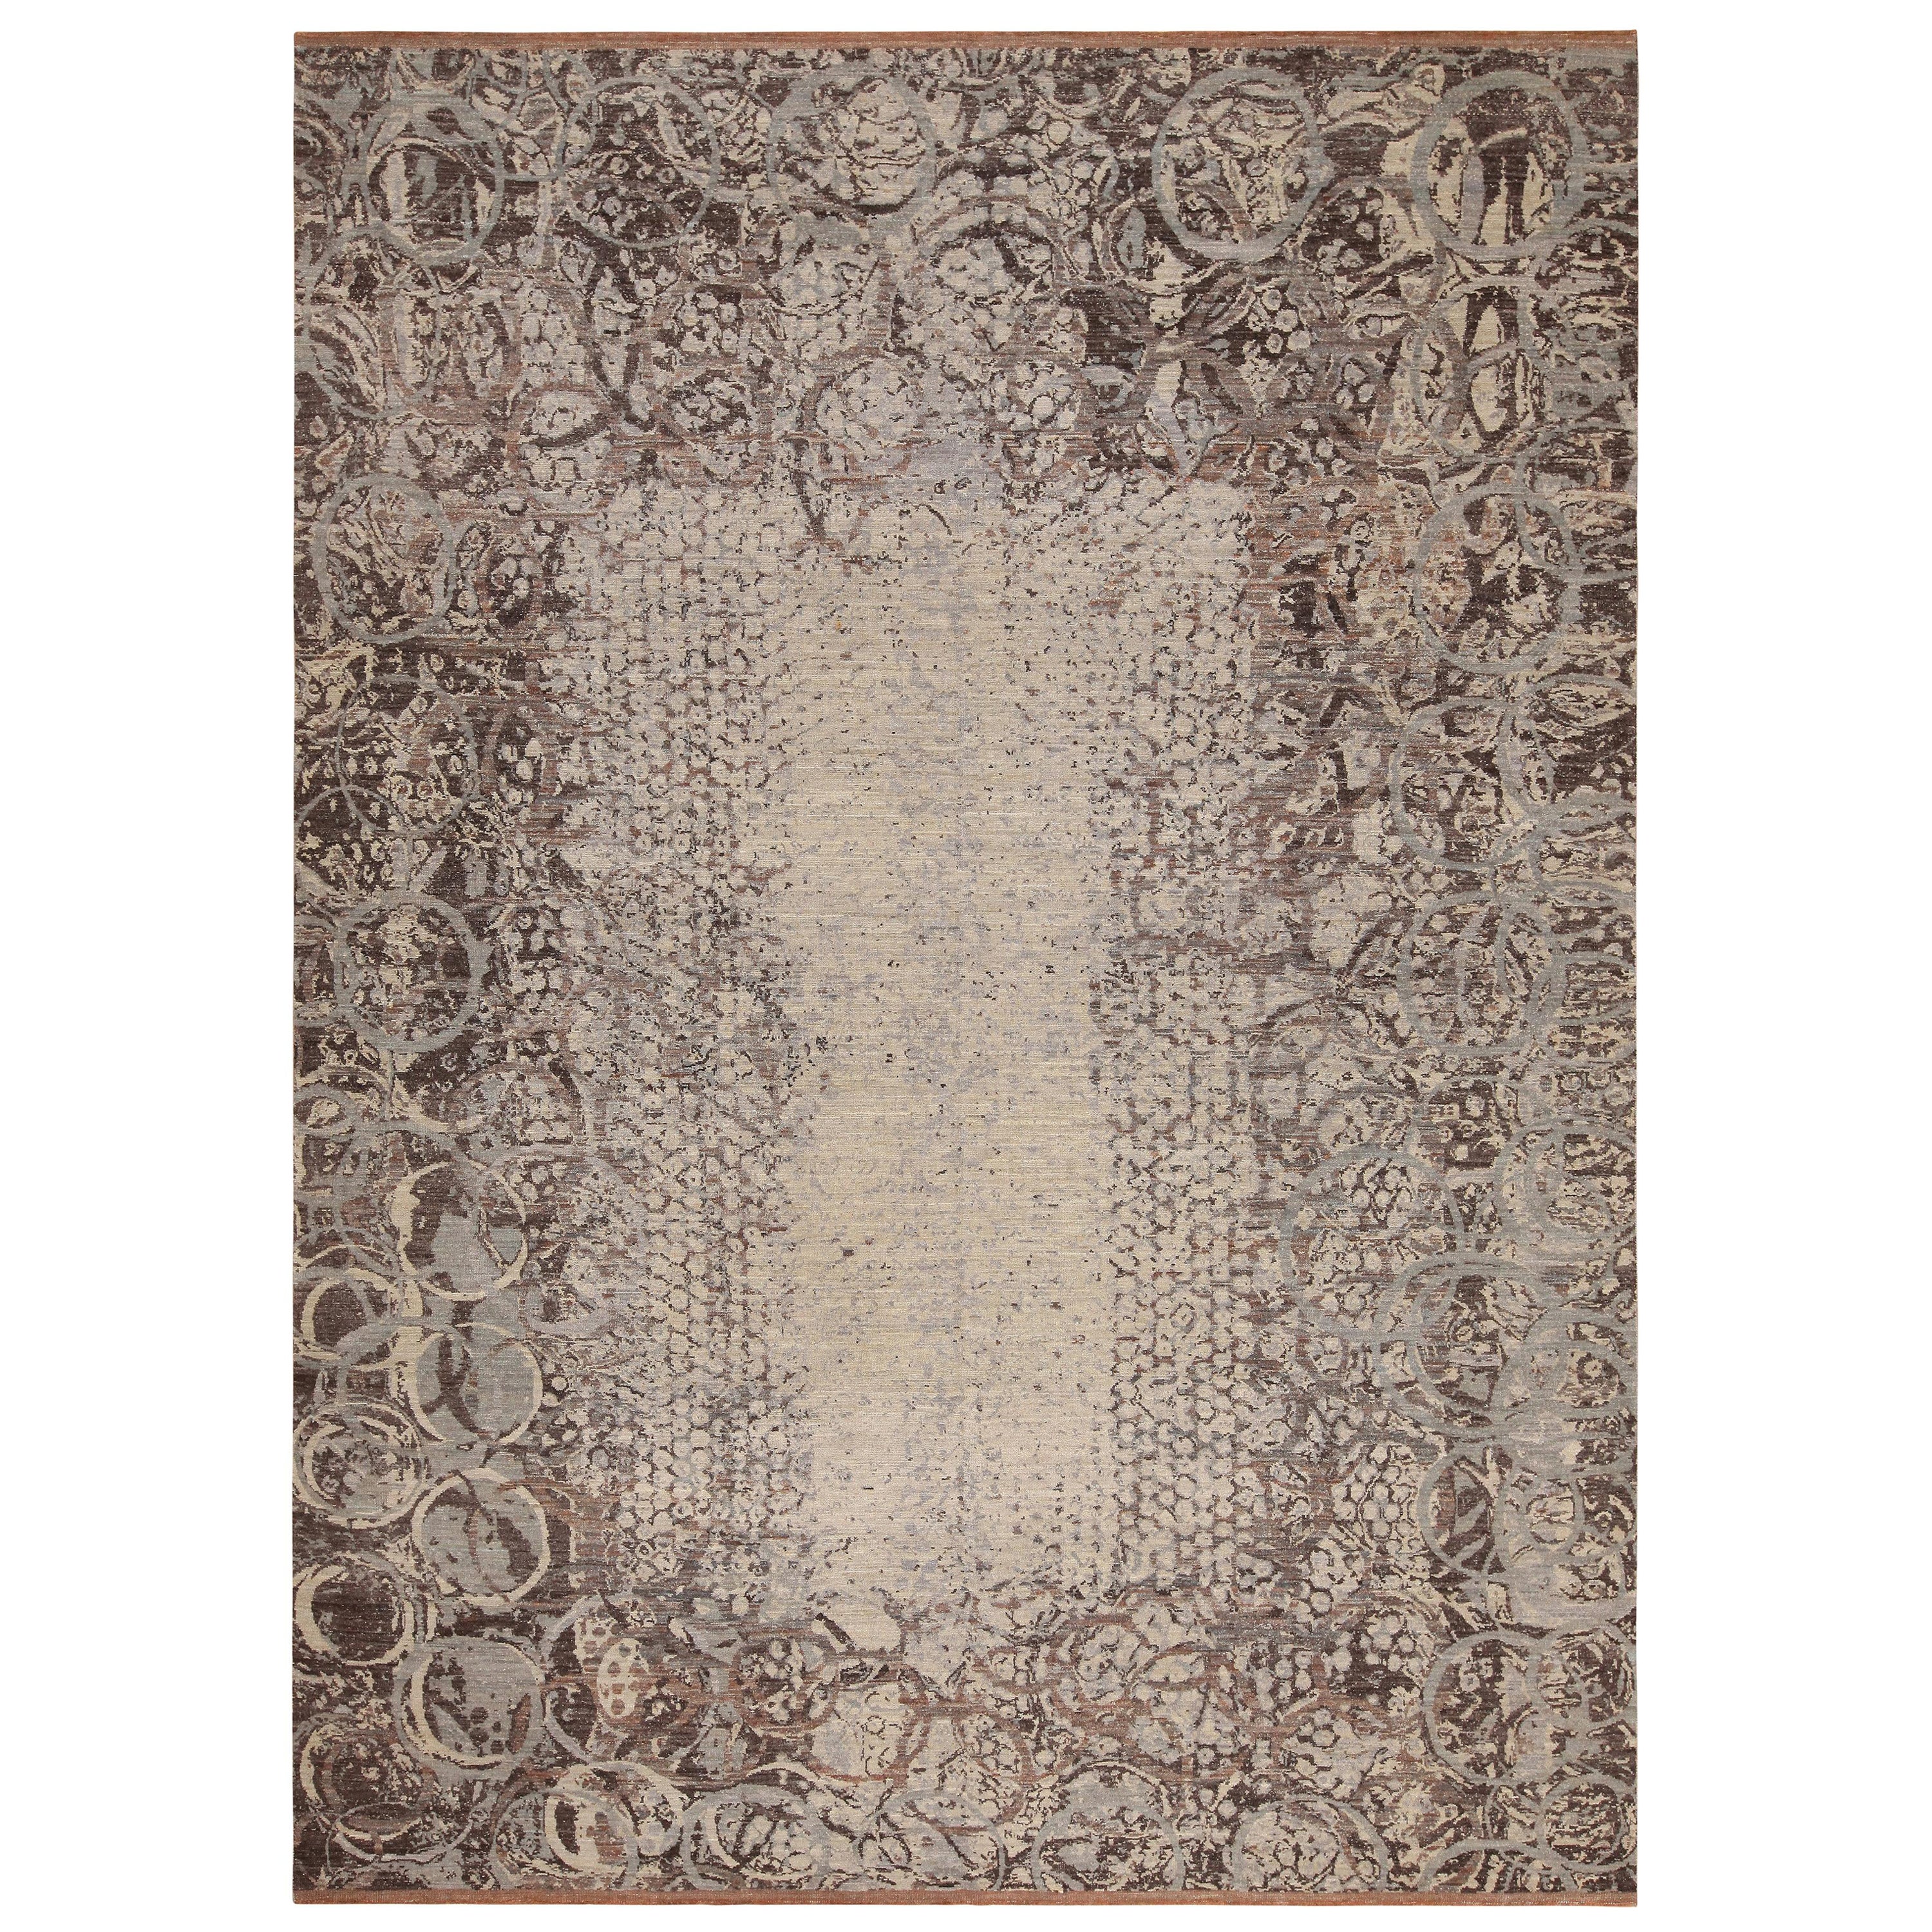 Nazmiyal Collection Nature Inspired Modern Transitional Rug. 9 ft x 12 ft 4 in For Sale